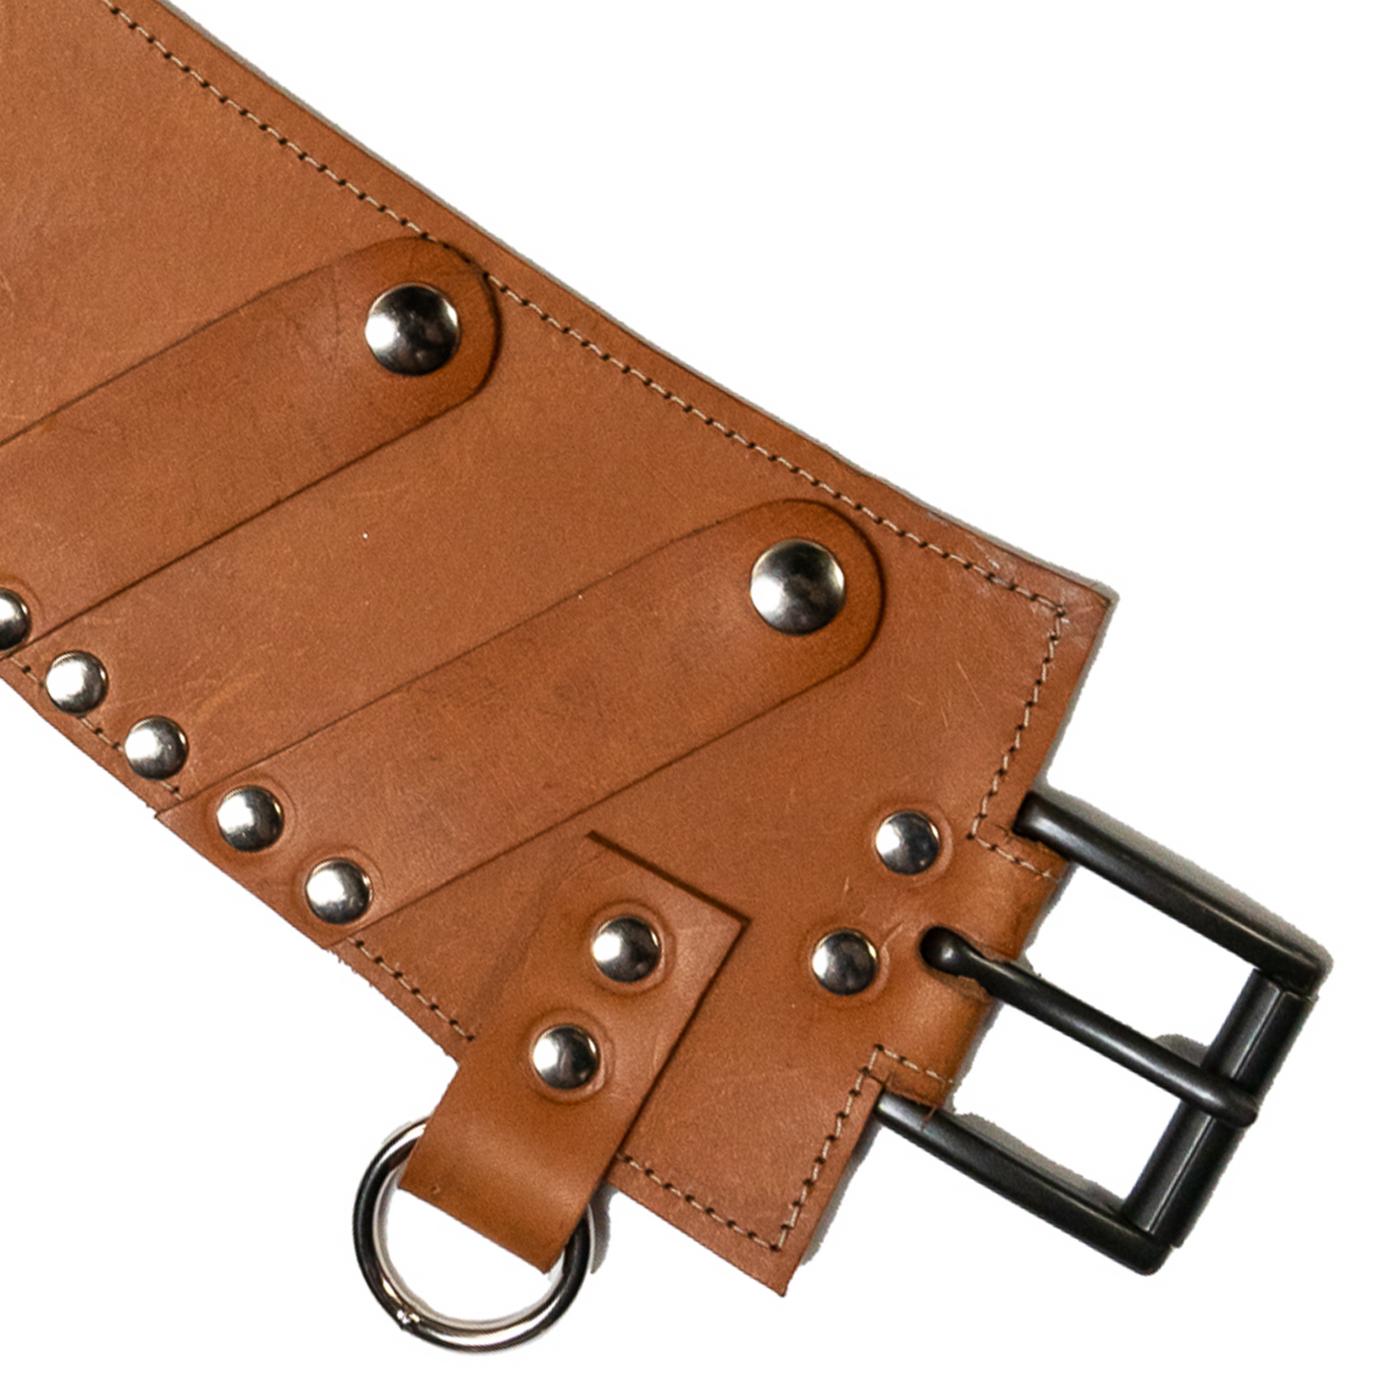 Real Leather Bandolier